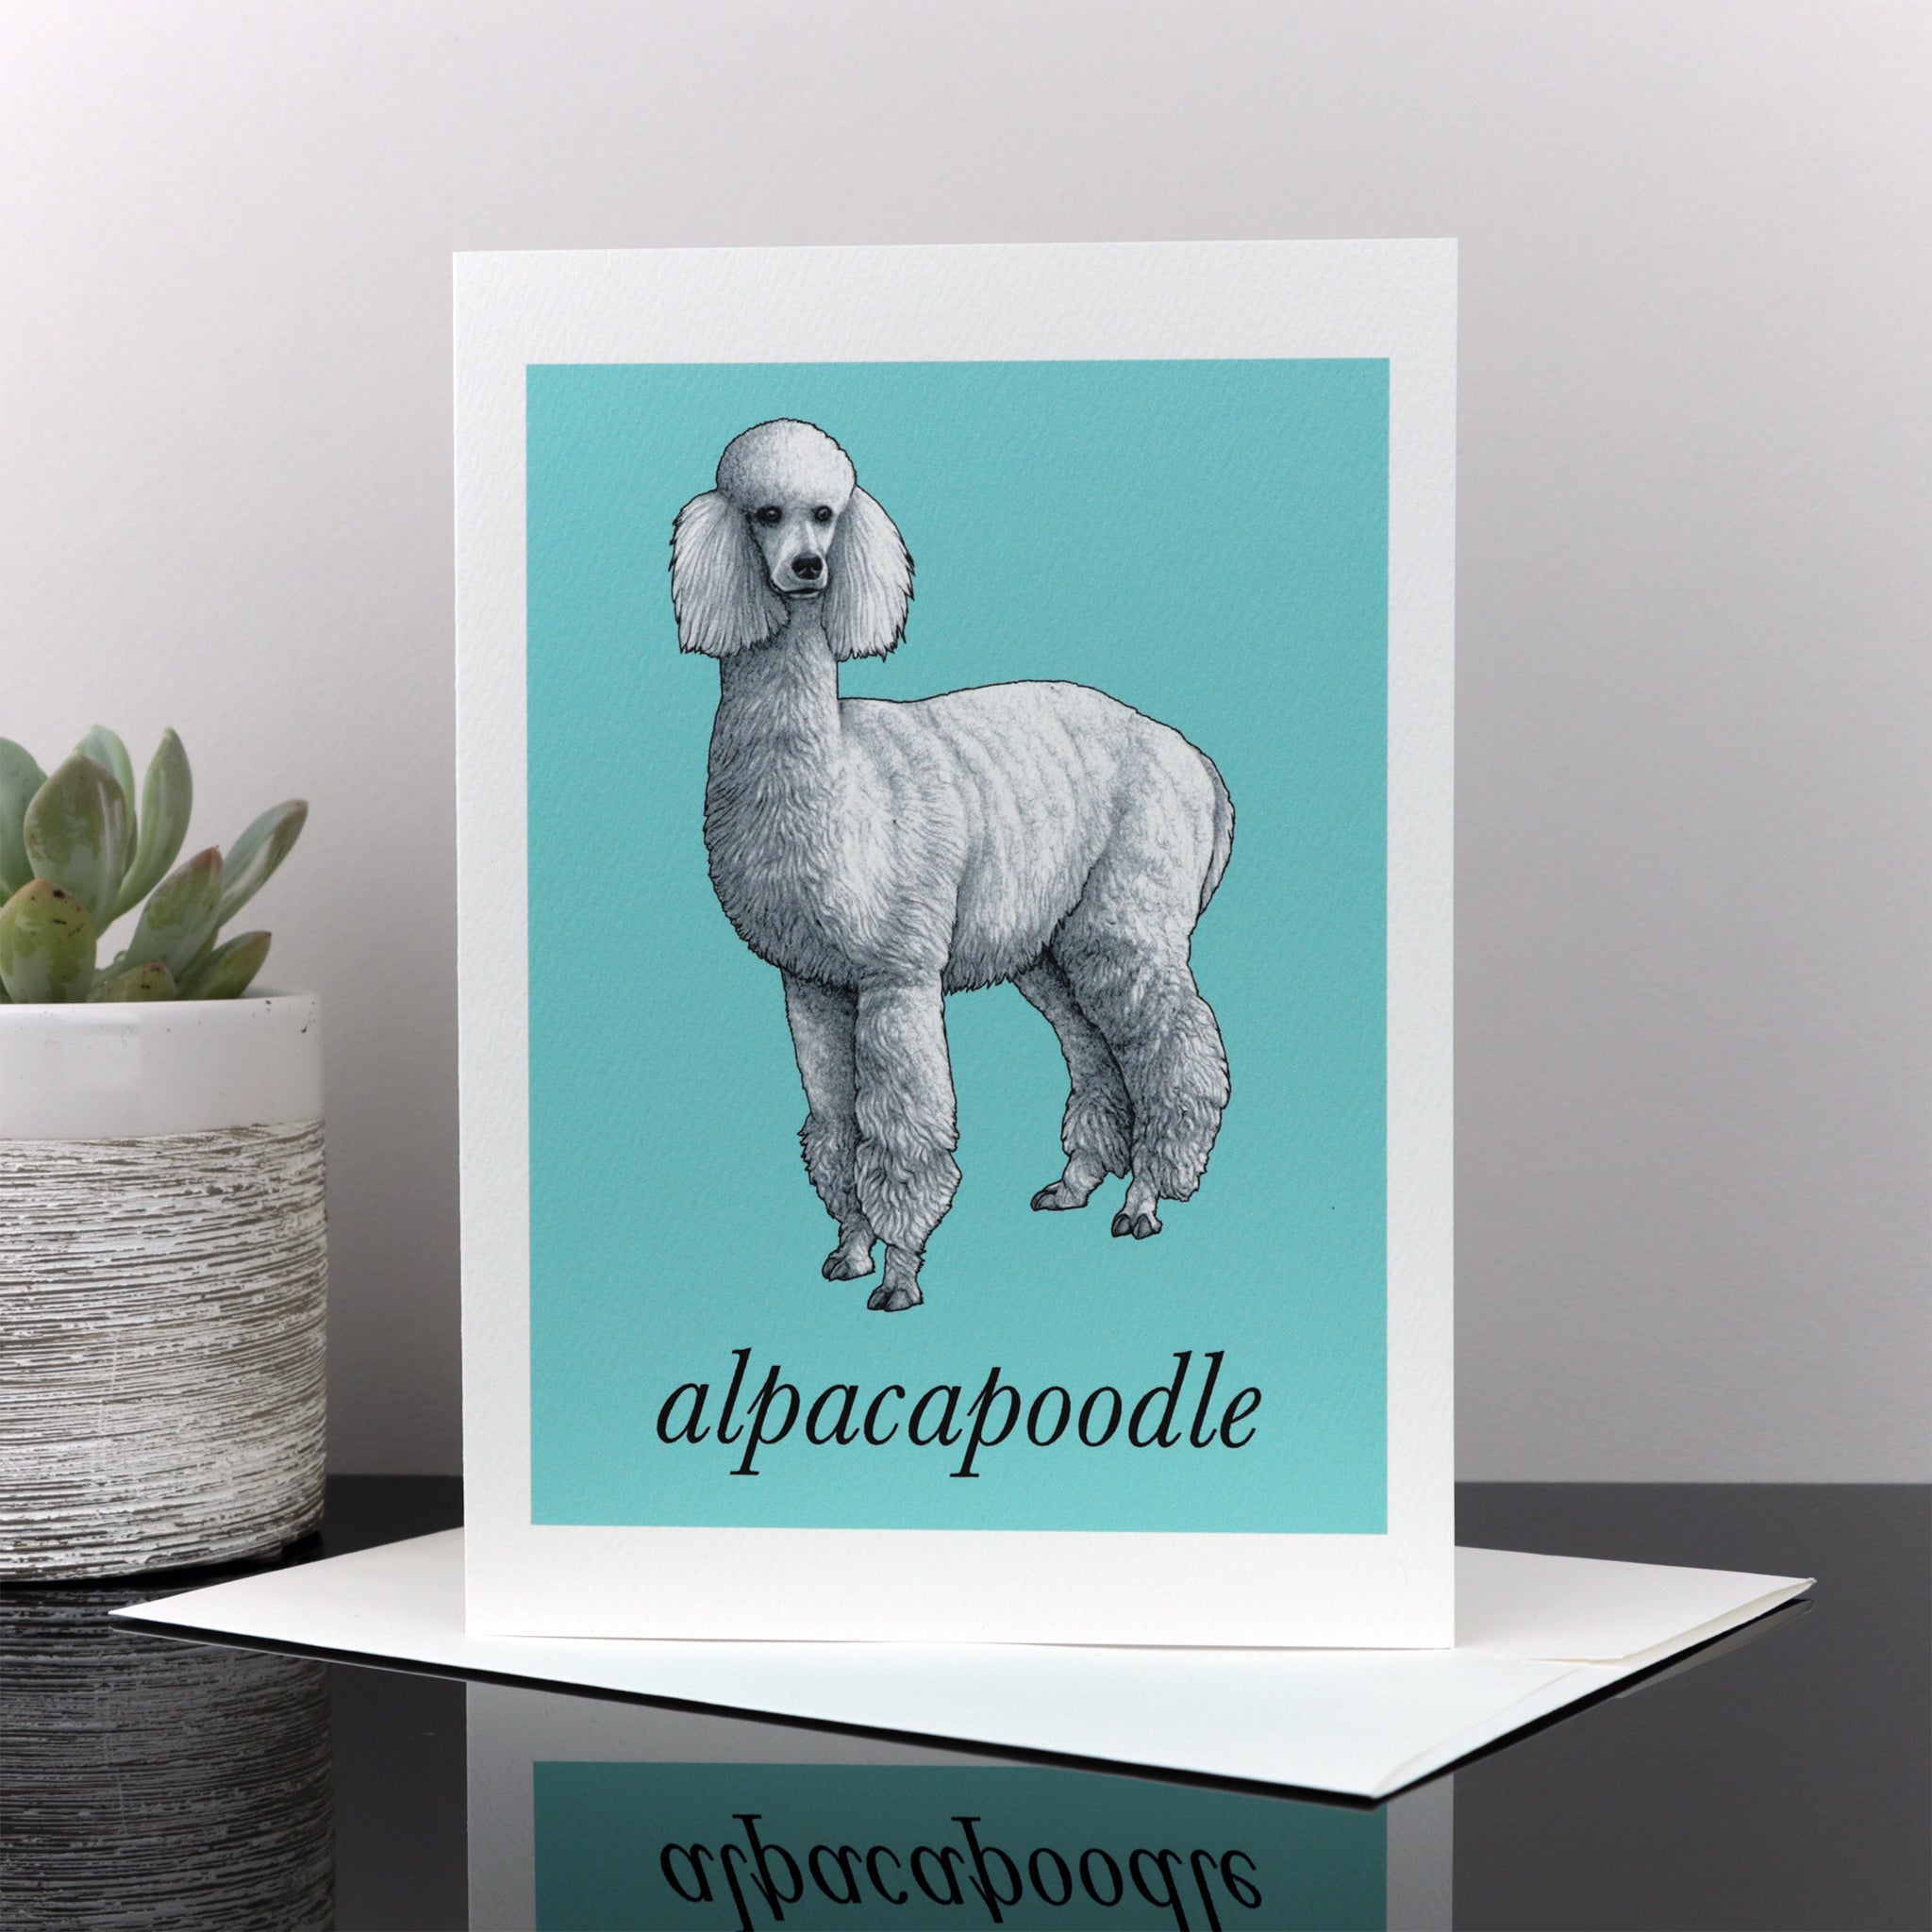 Alpacapoodle 5x7" Greeting Card